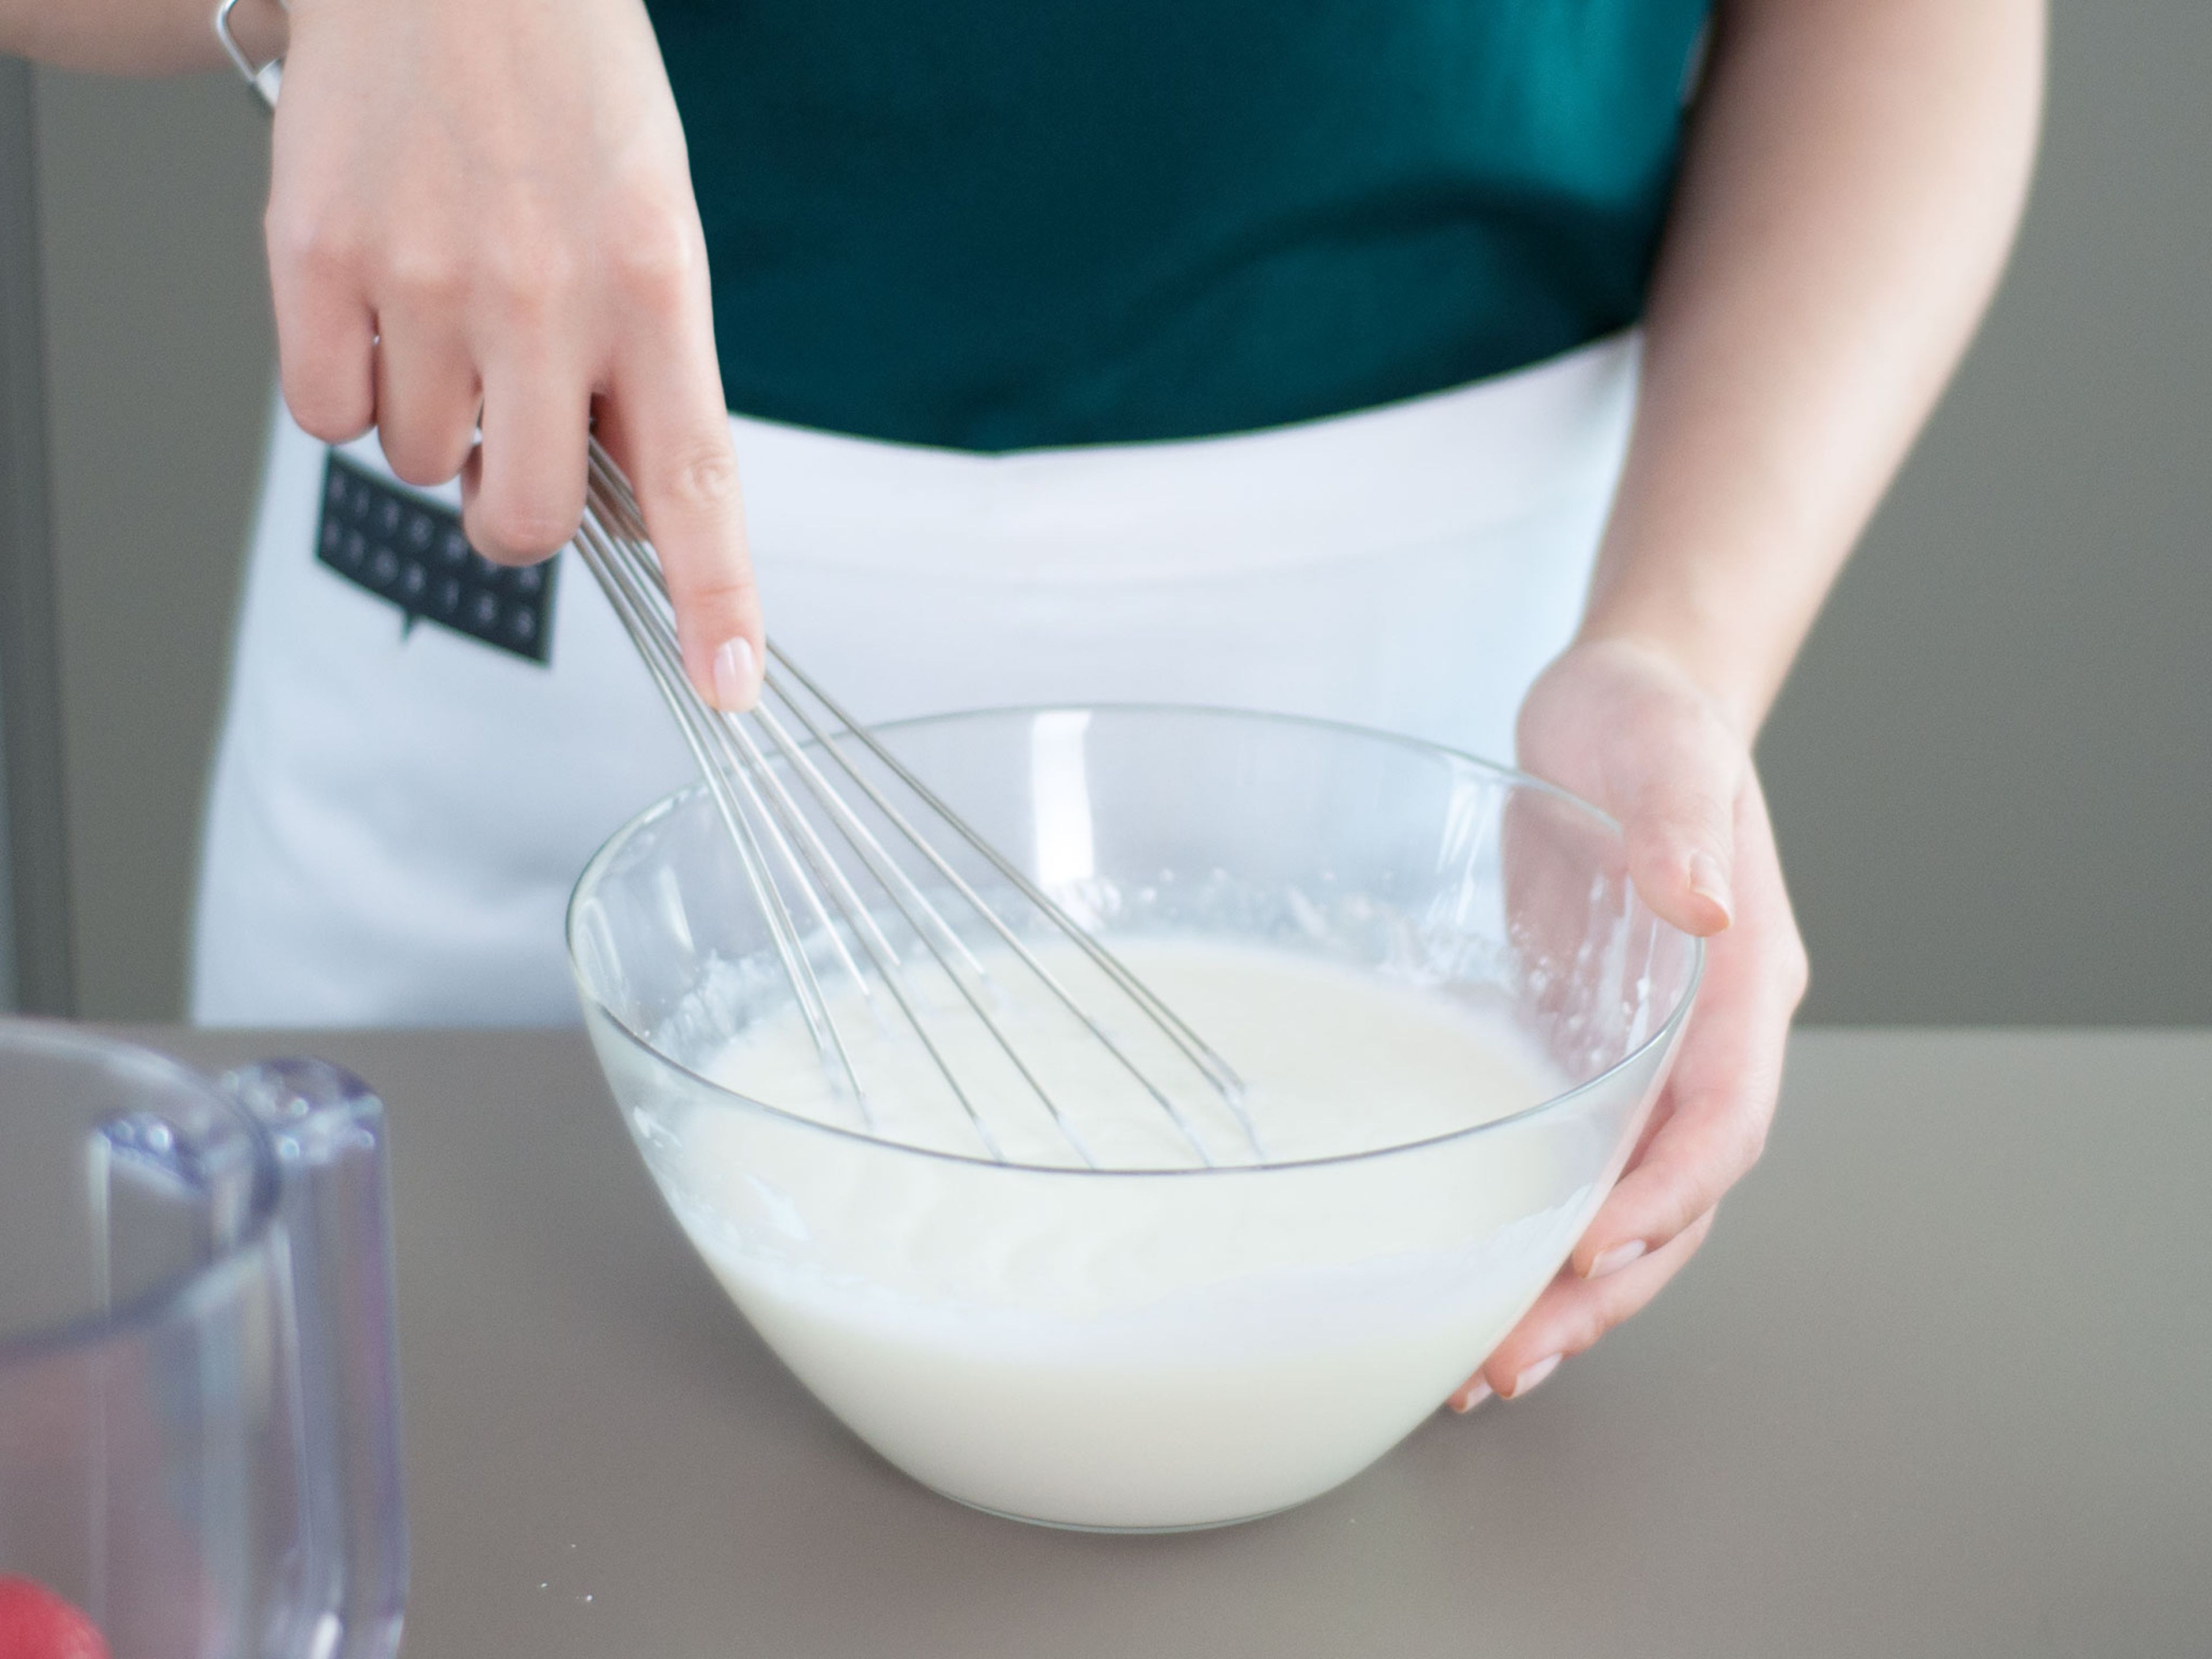 In a large bowl, whisk together yogurt, confectioner’s sugar, and lemon juice. Evenly distribute 1 - 2 tbsp of the yogurt mixture among popsicle molds.